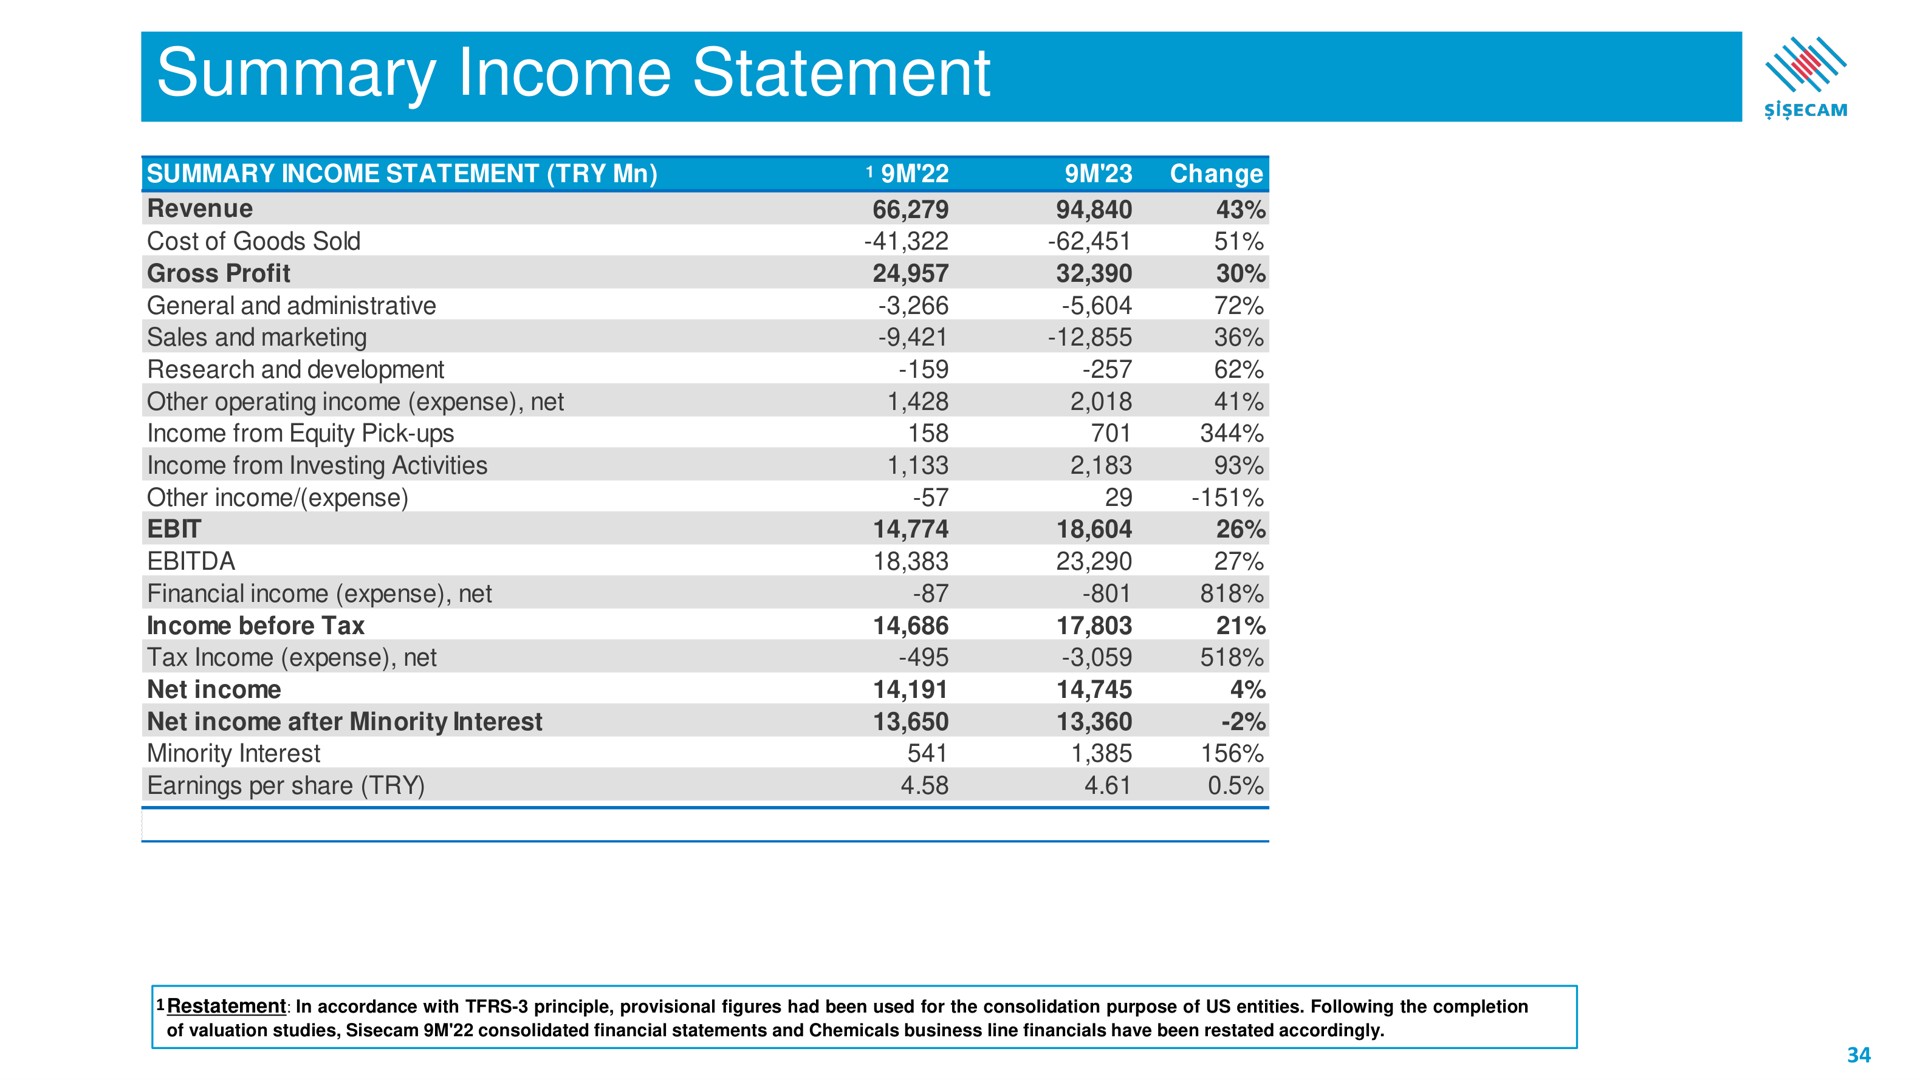 summary income statement | Sisecam Resources